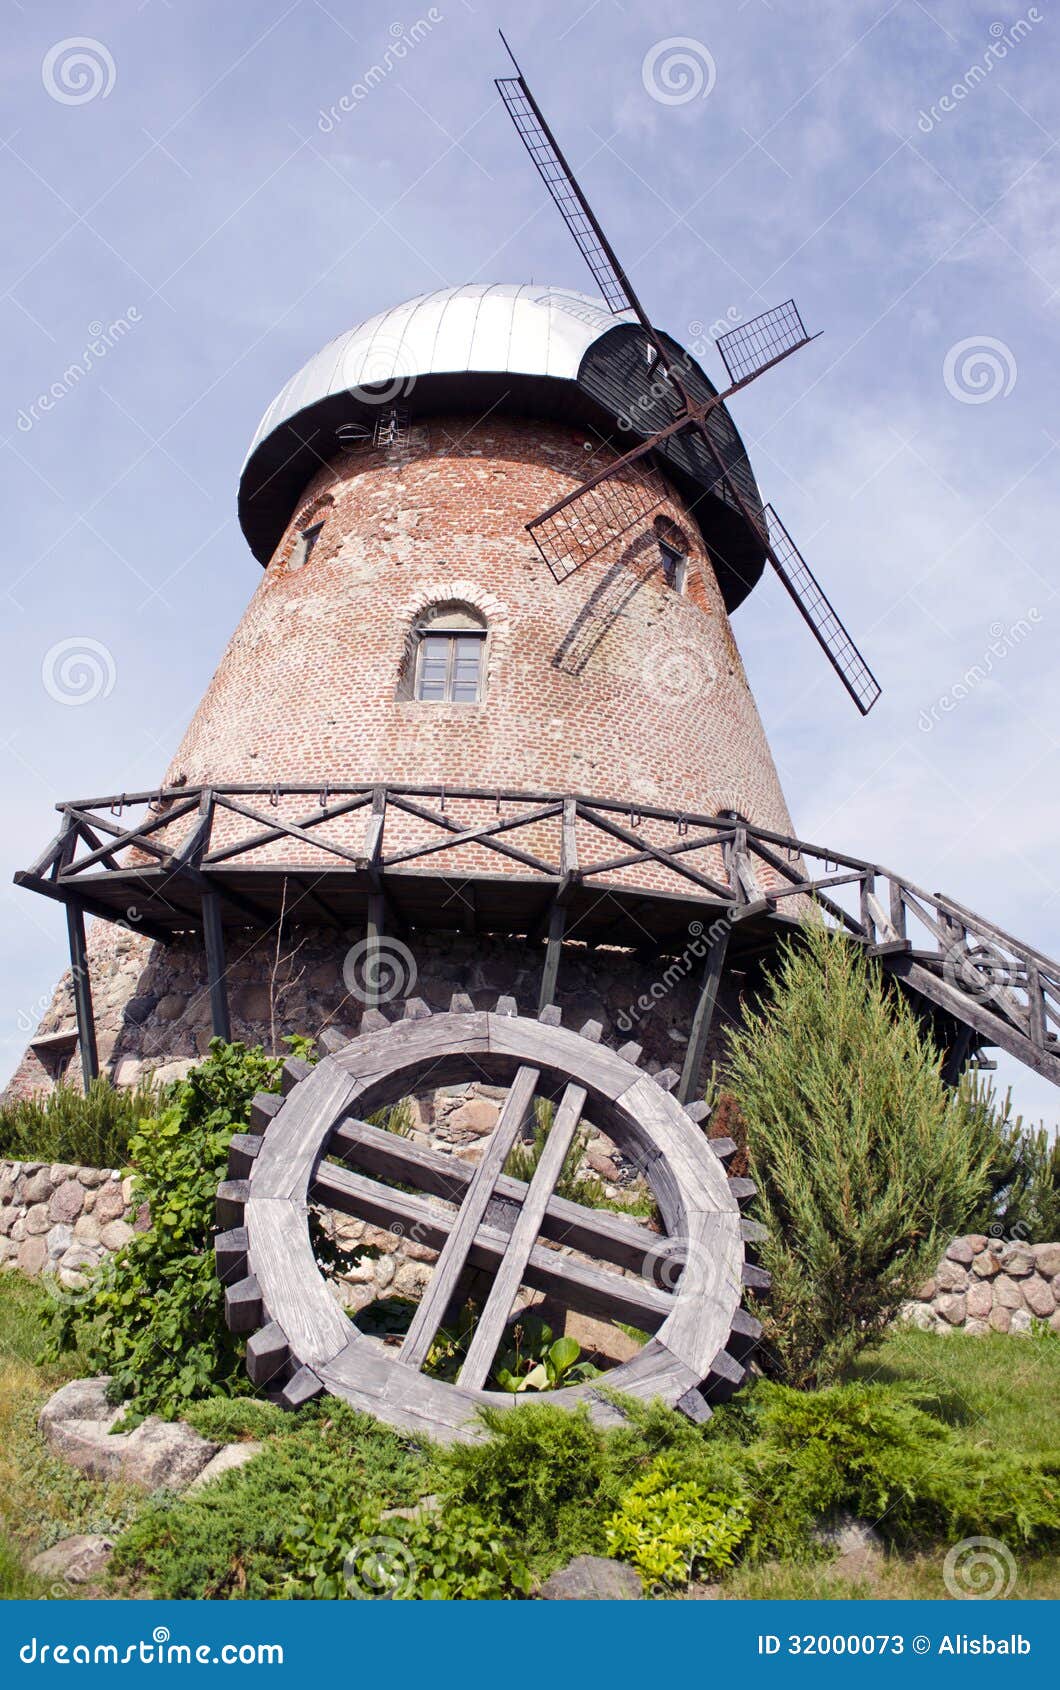 Historical Windmill And Wooden Wheel Stock Photos - Image: 32000073